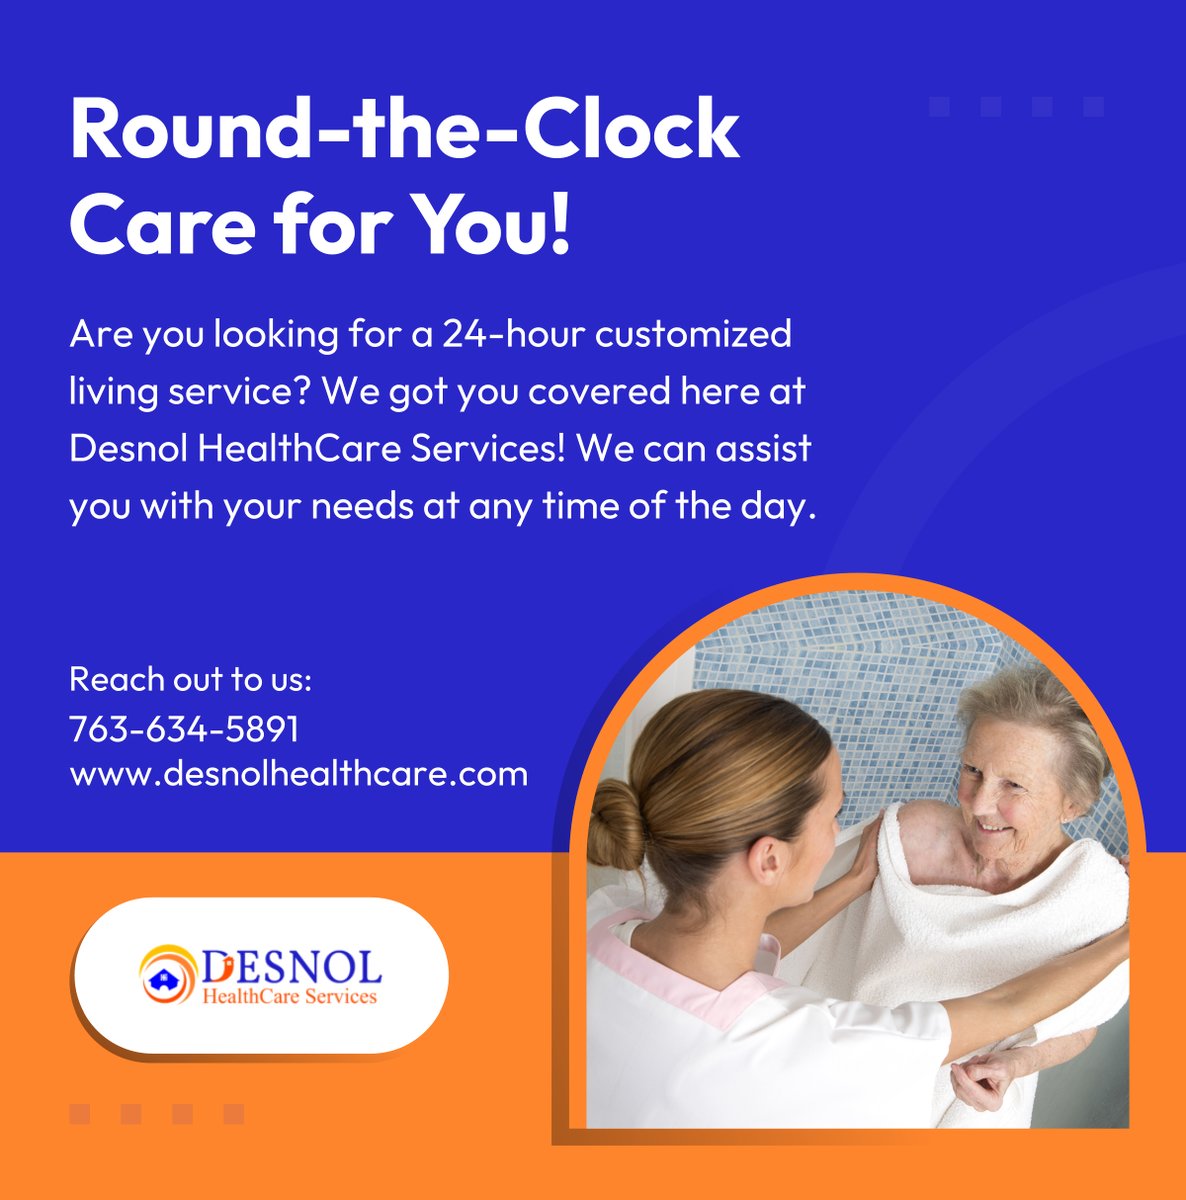 Our services cover assistance with activities of daily living (ADL) such as bathing, dressing, grooming, and personal care. We got your round-the-clock needs covered! Contact us today for more details.

#HealthCareServices #BrooklynCenterMN #RoundTheClockCare